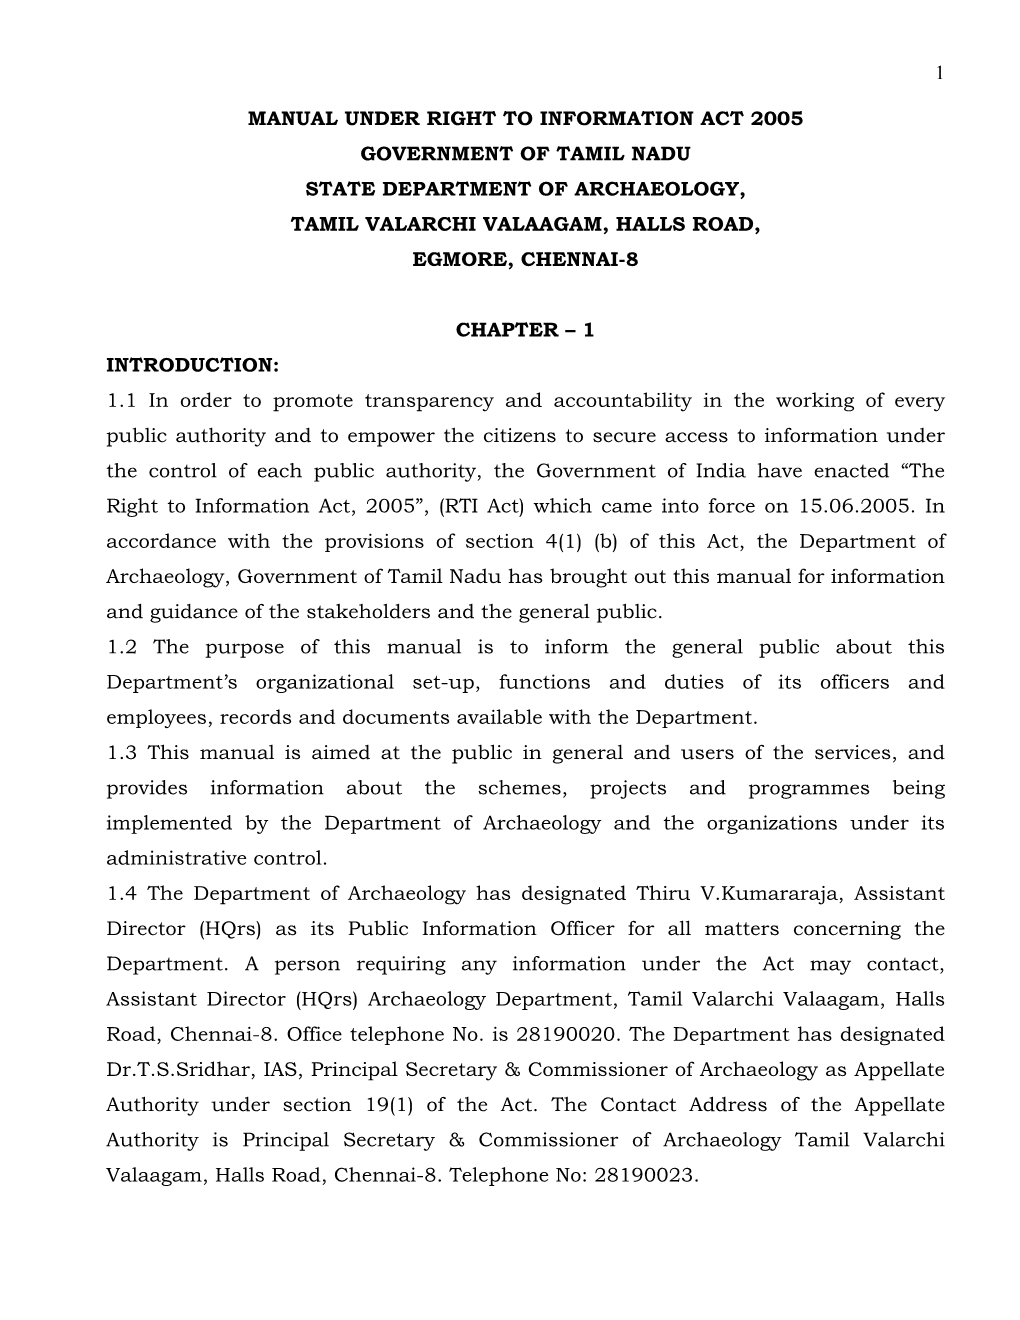 1 Manual Under Right to Information Act 2005